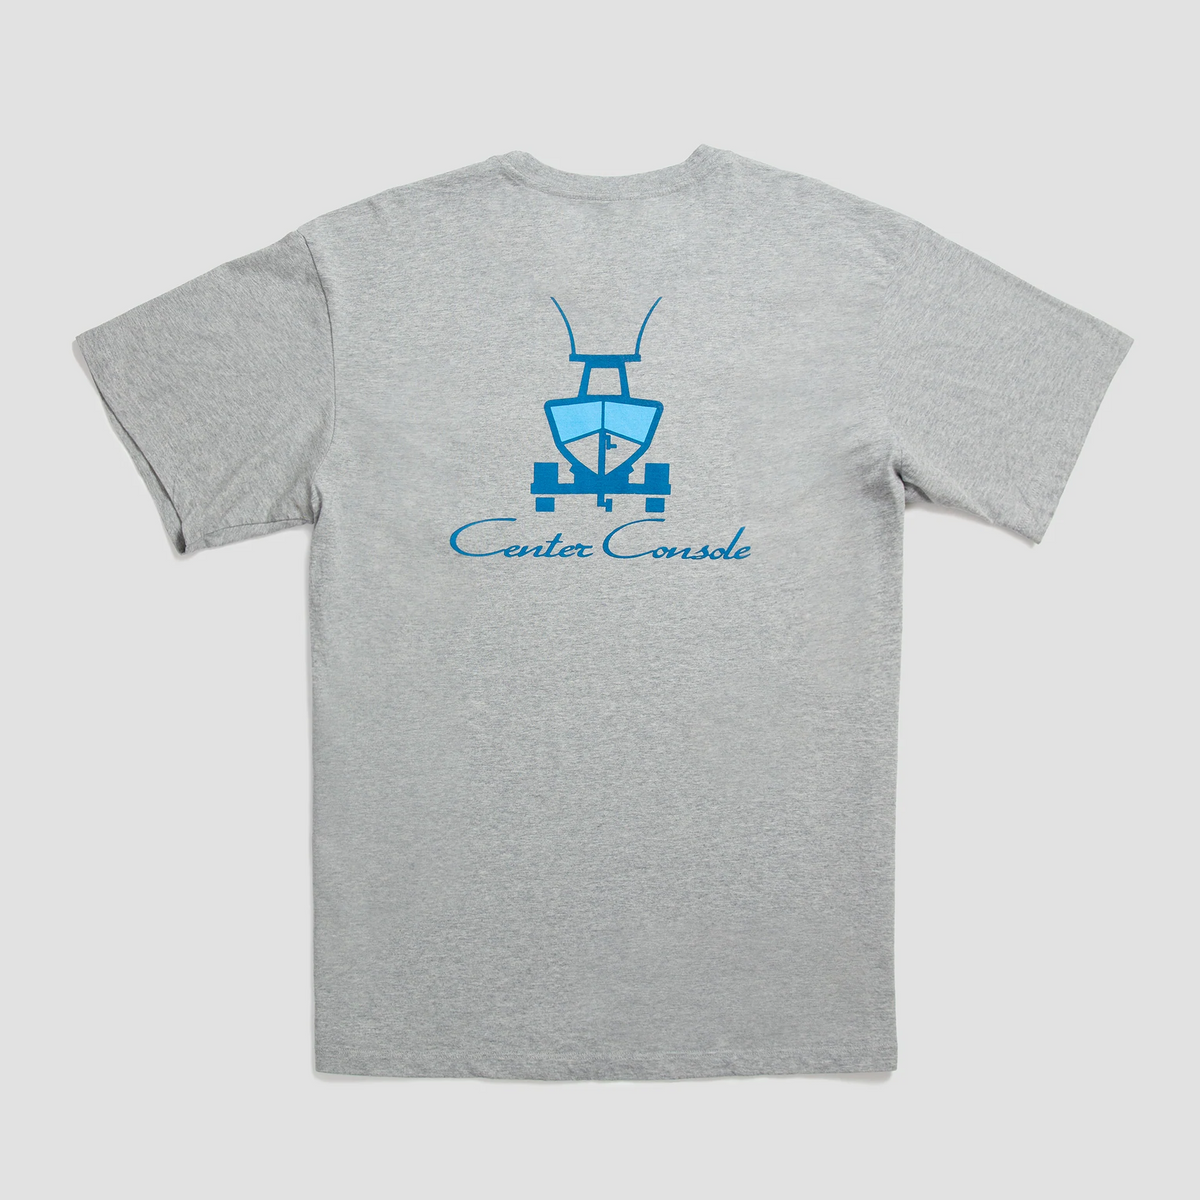 Sale - Center Console Boat House Tee Shirt